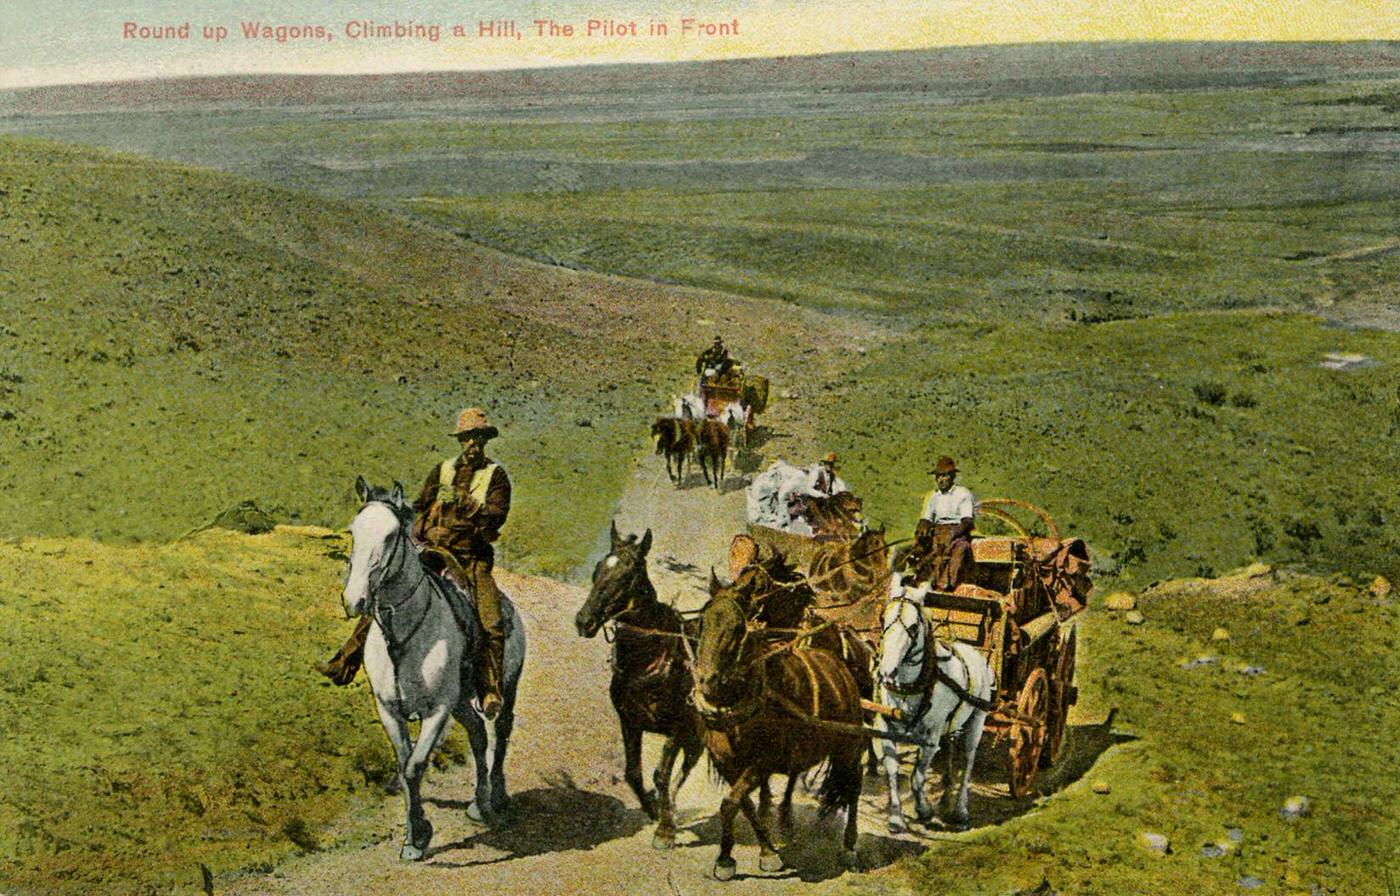 Wagons on the prairie, late 19th century: 'Round up wagons, climbing a hill, the pilot in front.